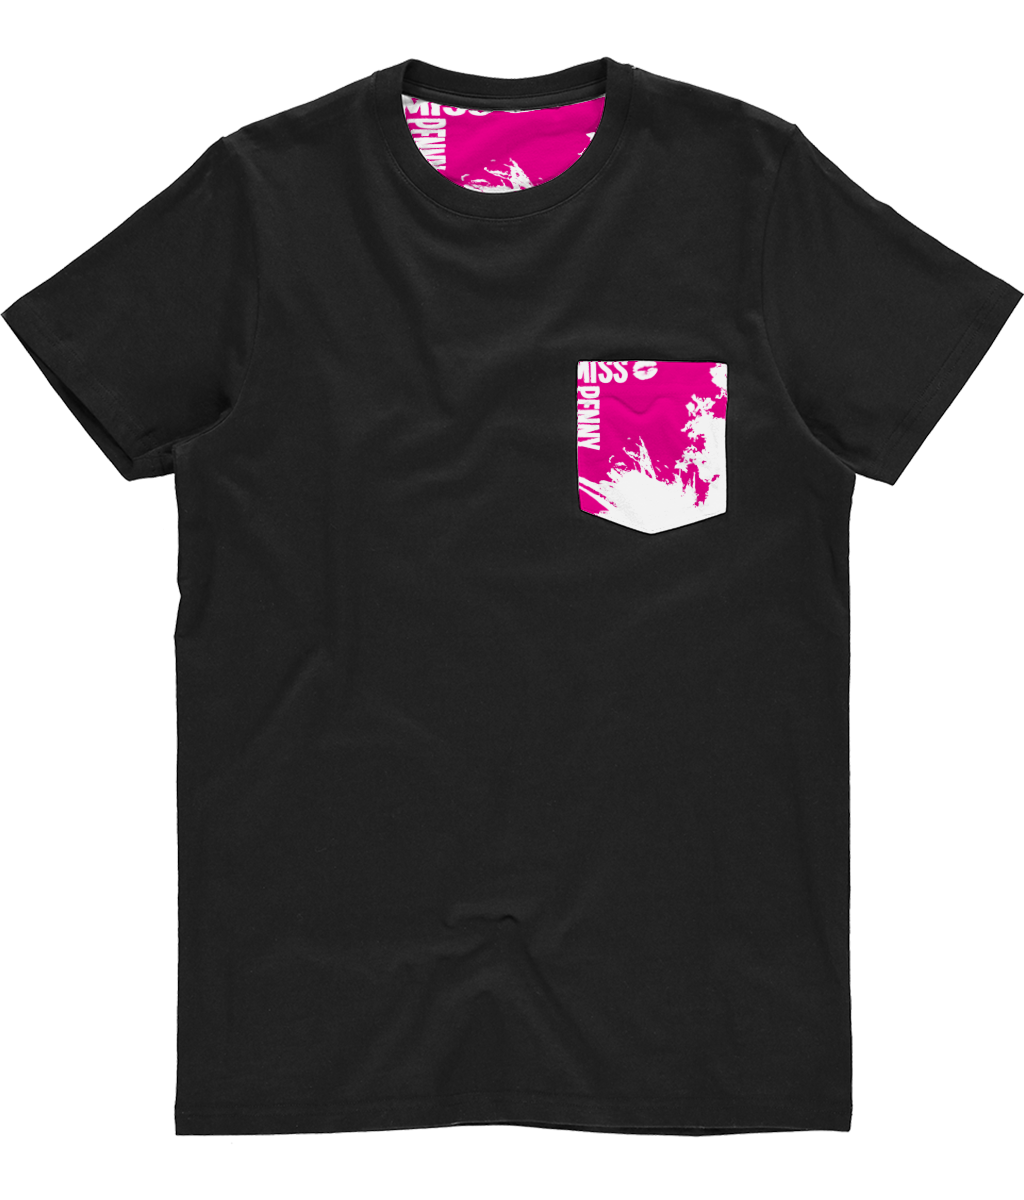 Miss Penny Abstract Pocket Tee